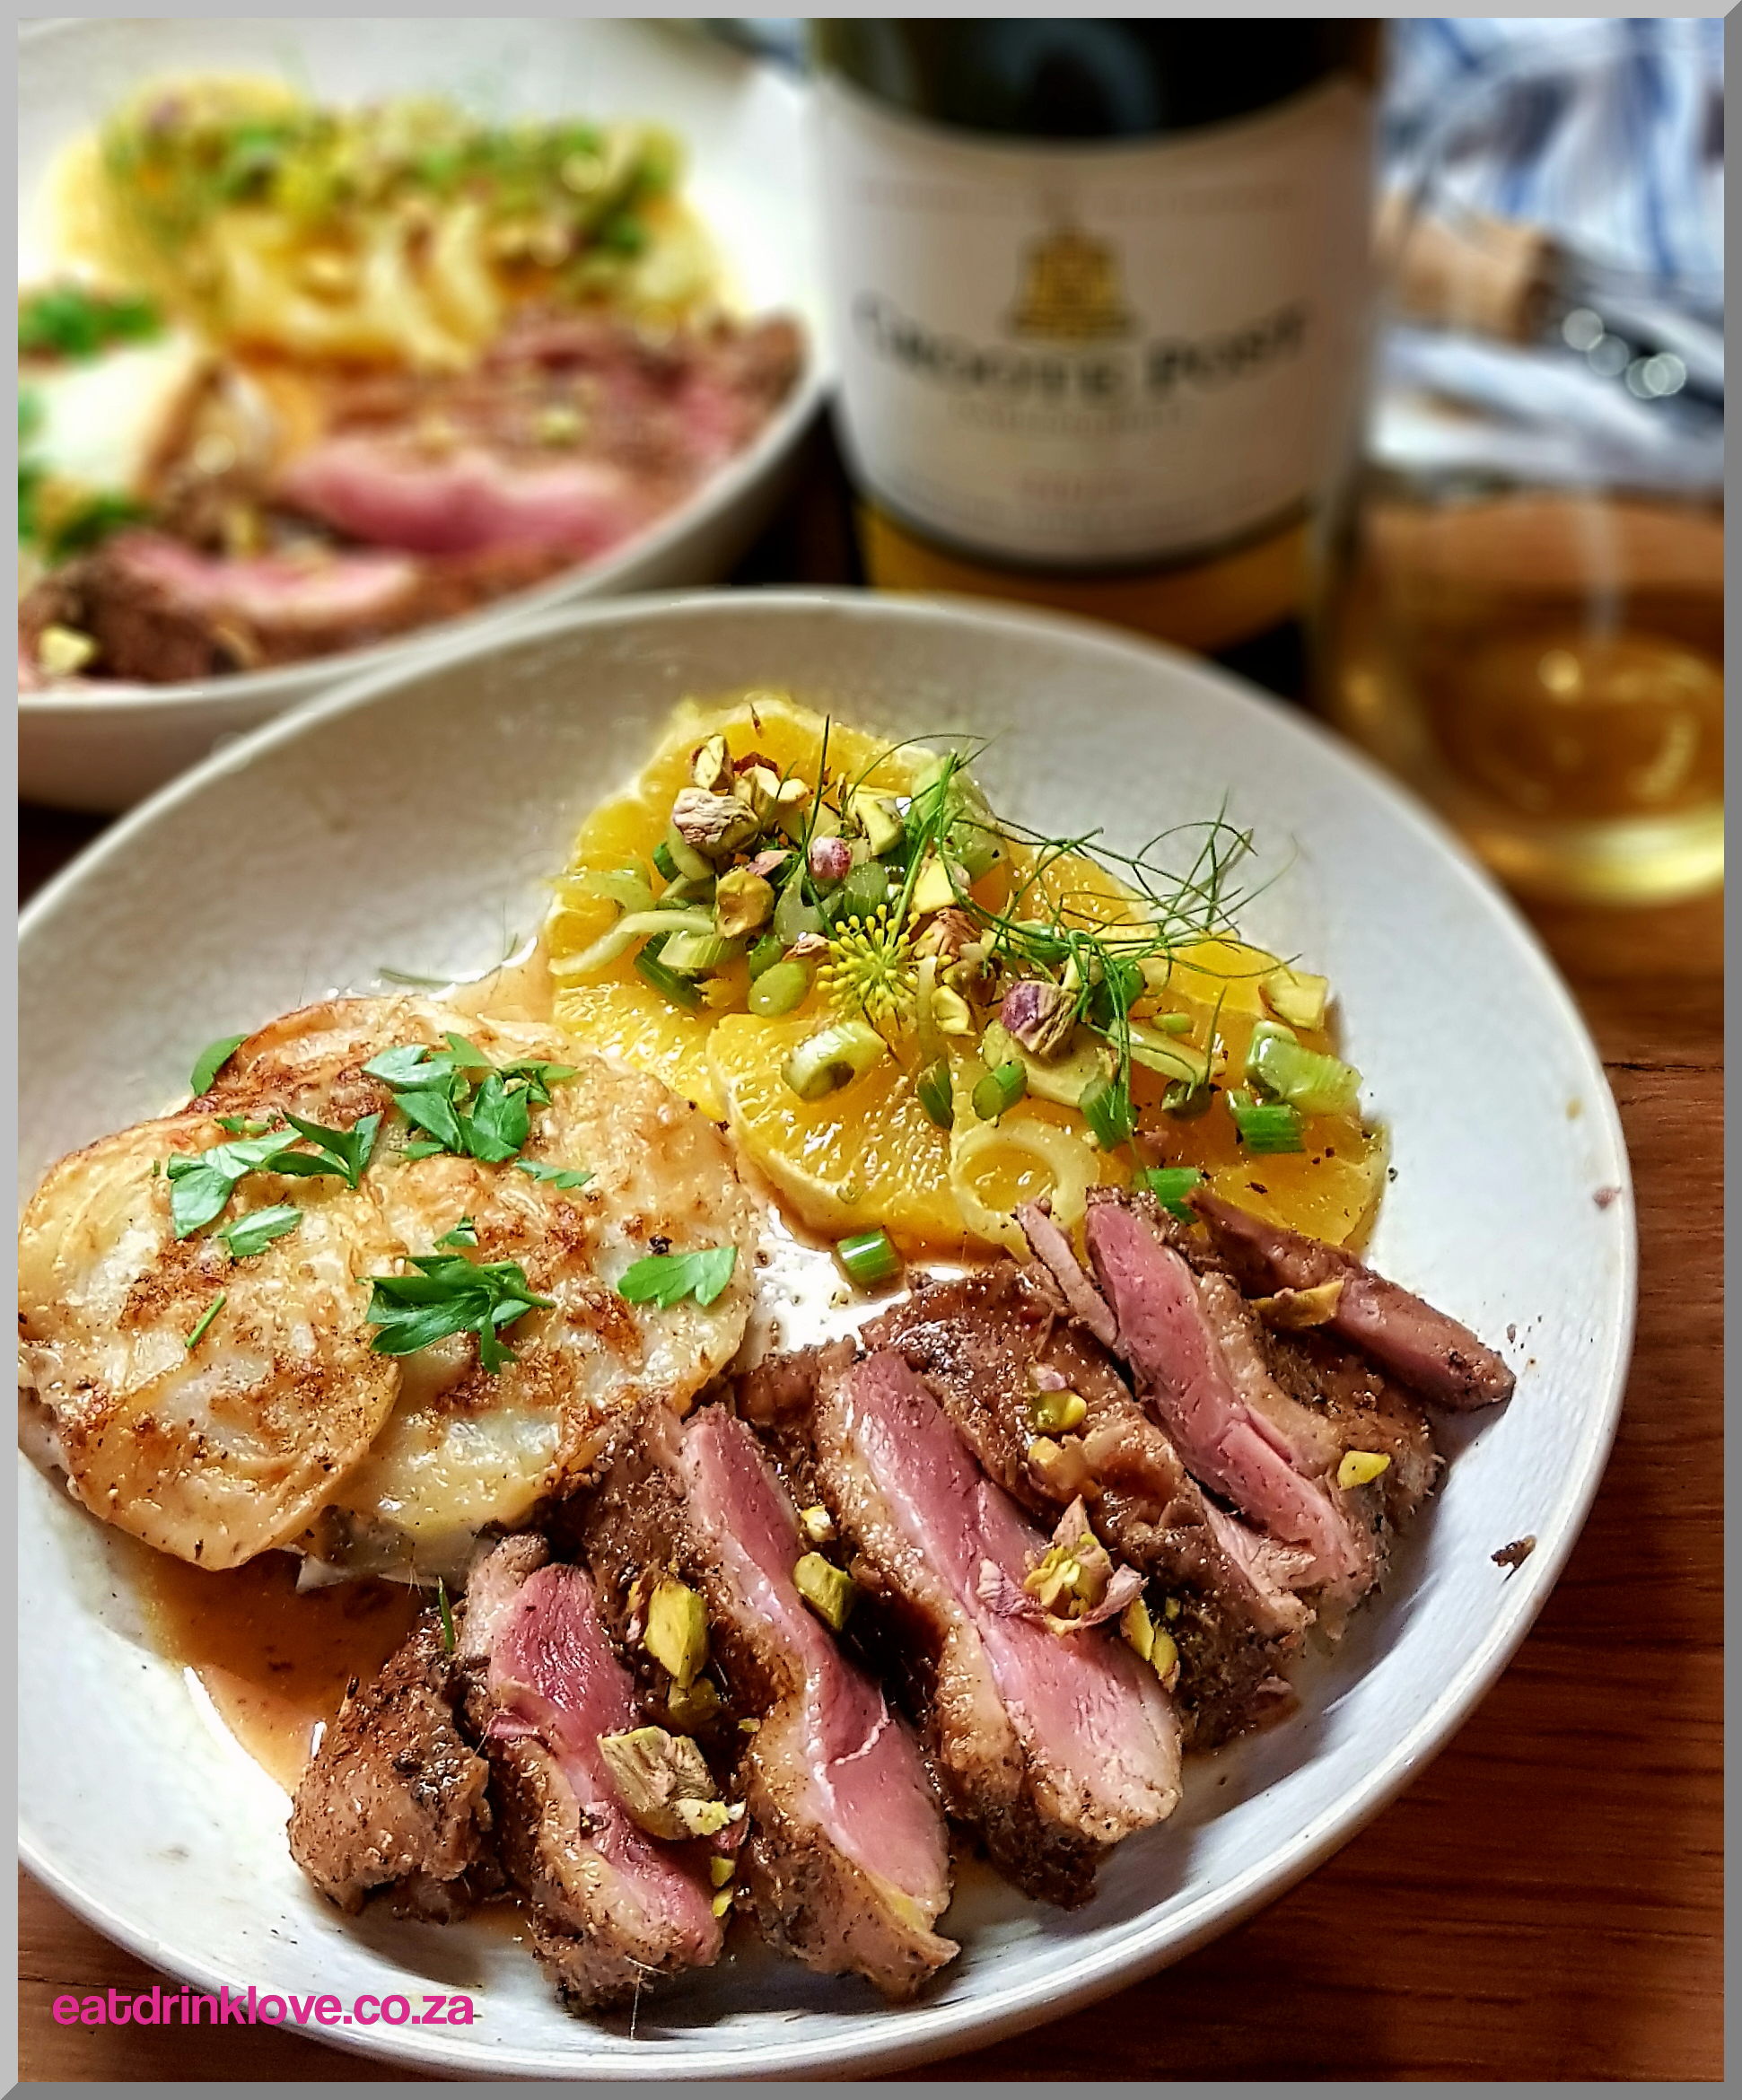 Spiced Duck Breast with Orange and Fennel Salad and Gratin Dauphinois